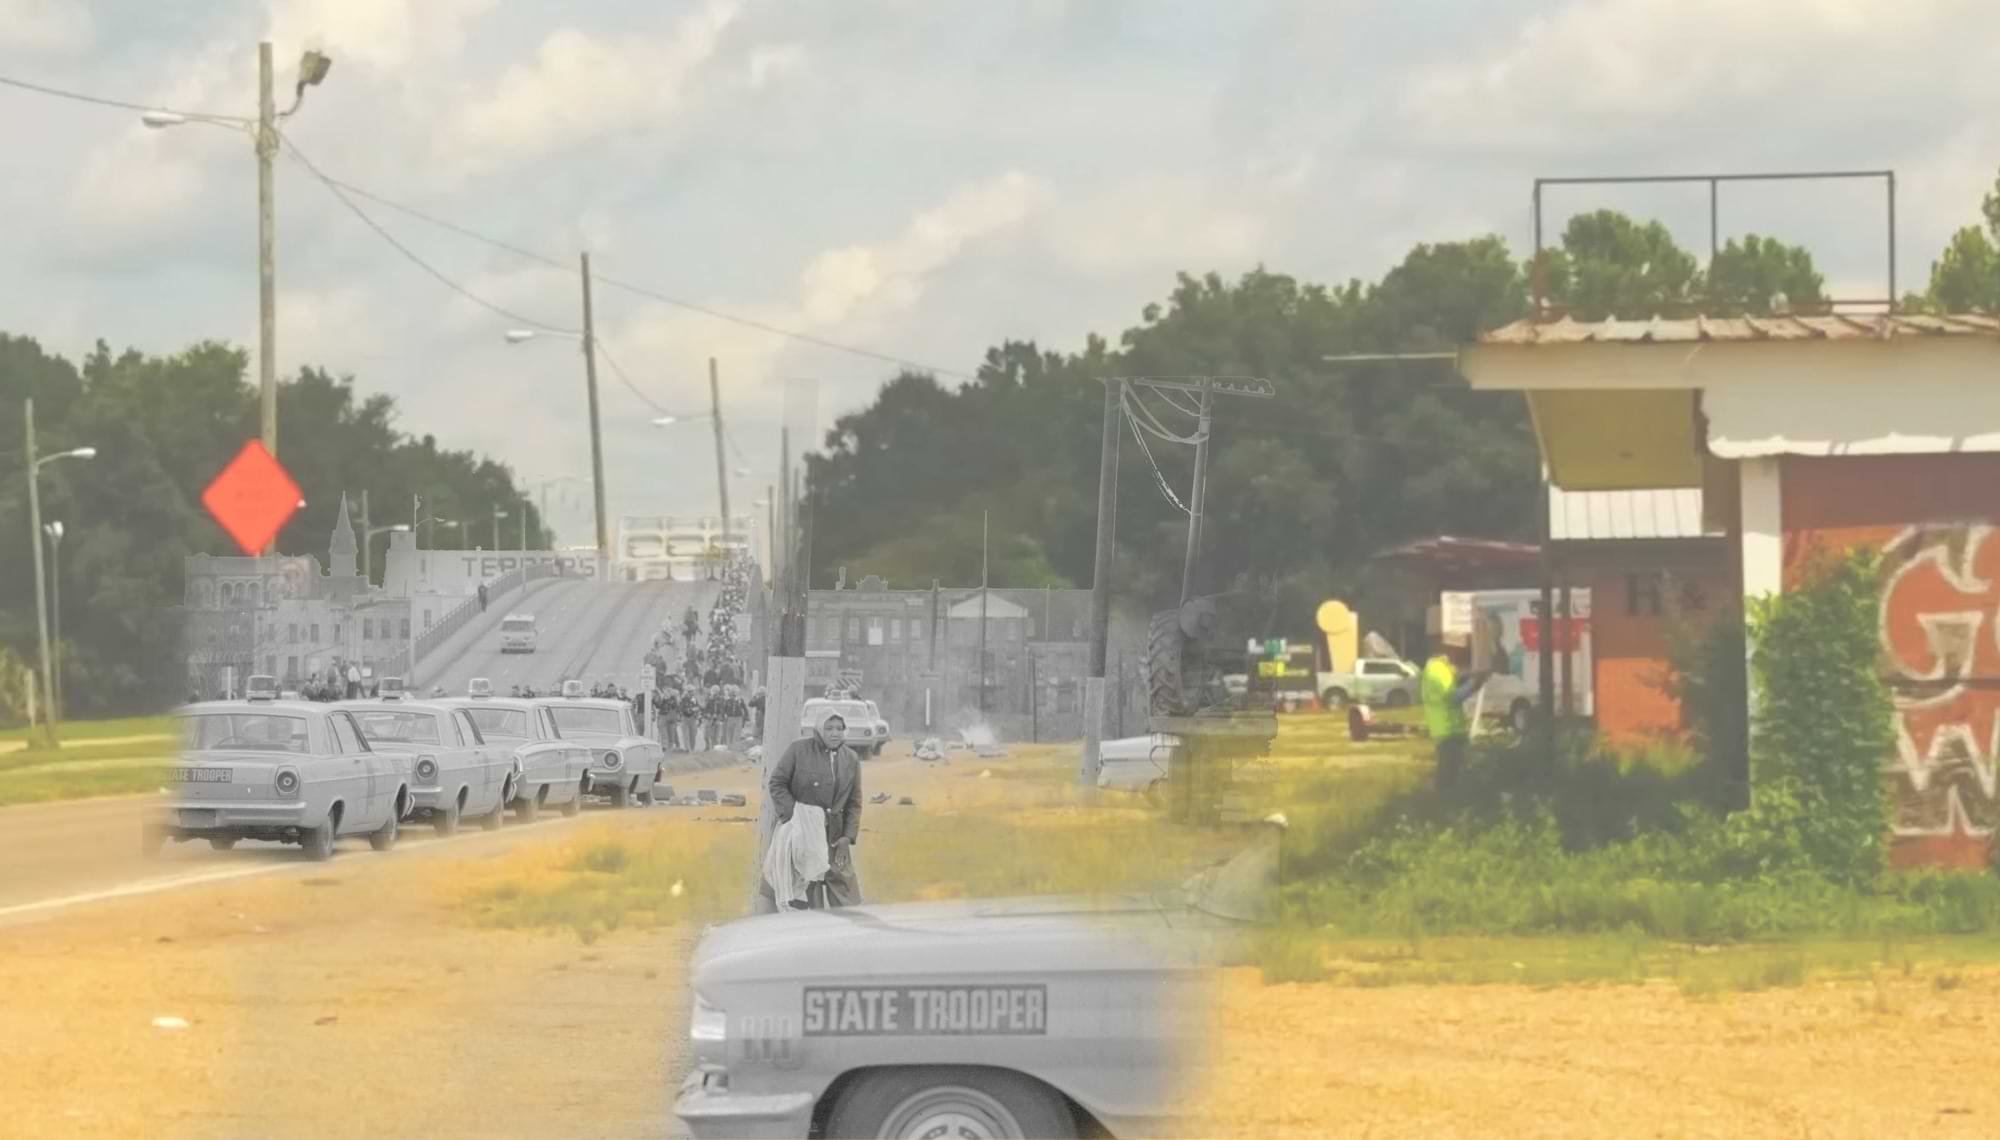 Selma marcher super imposed using old photograph and new